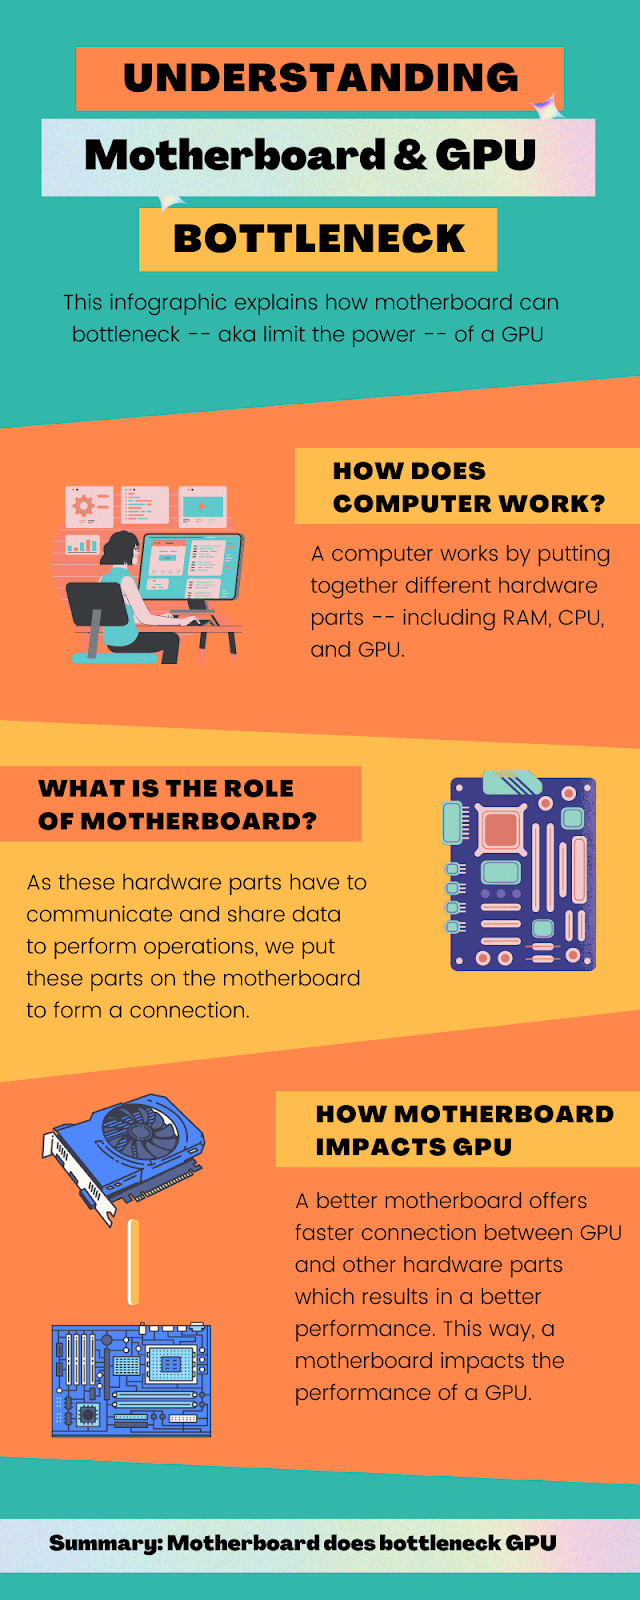 Motherboard Impacts GPU Infographic